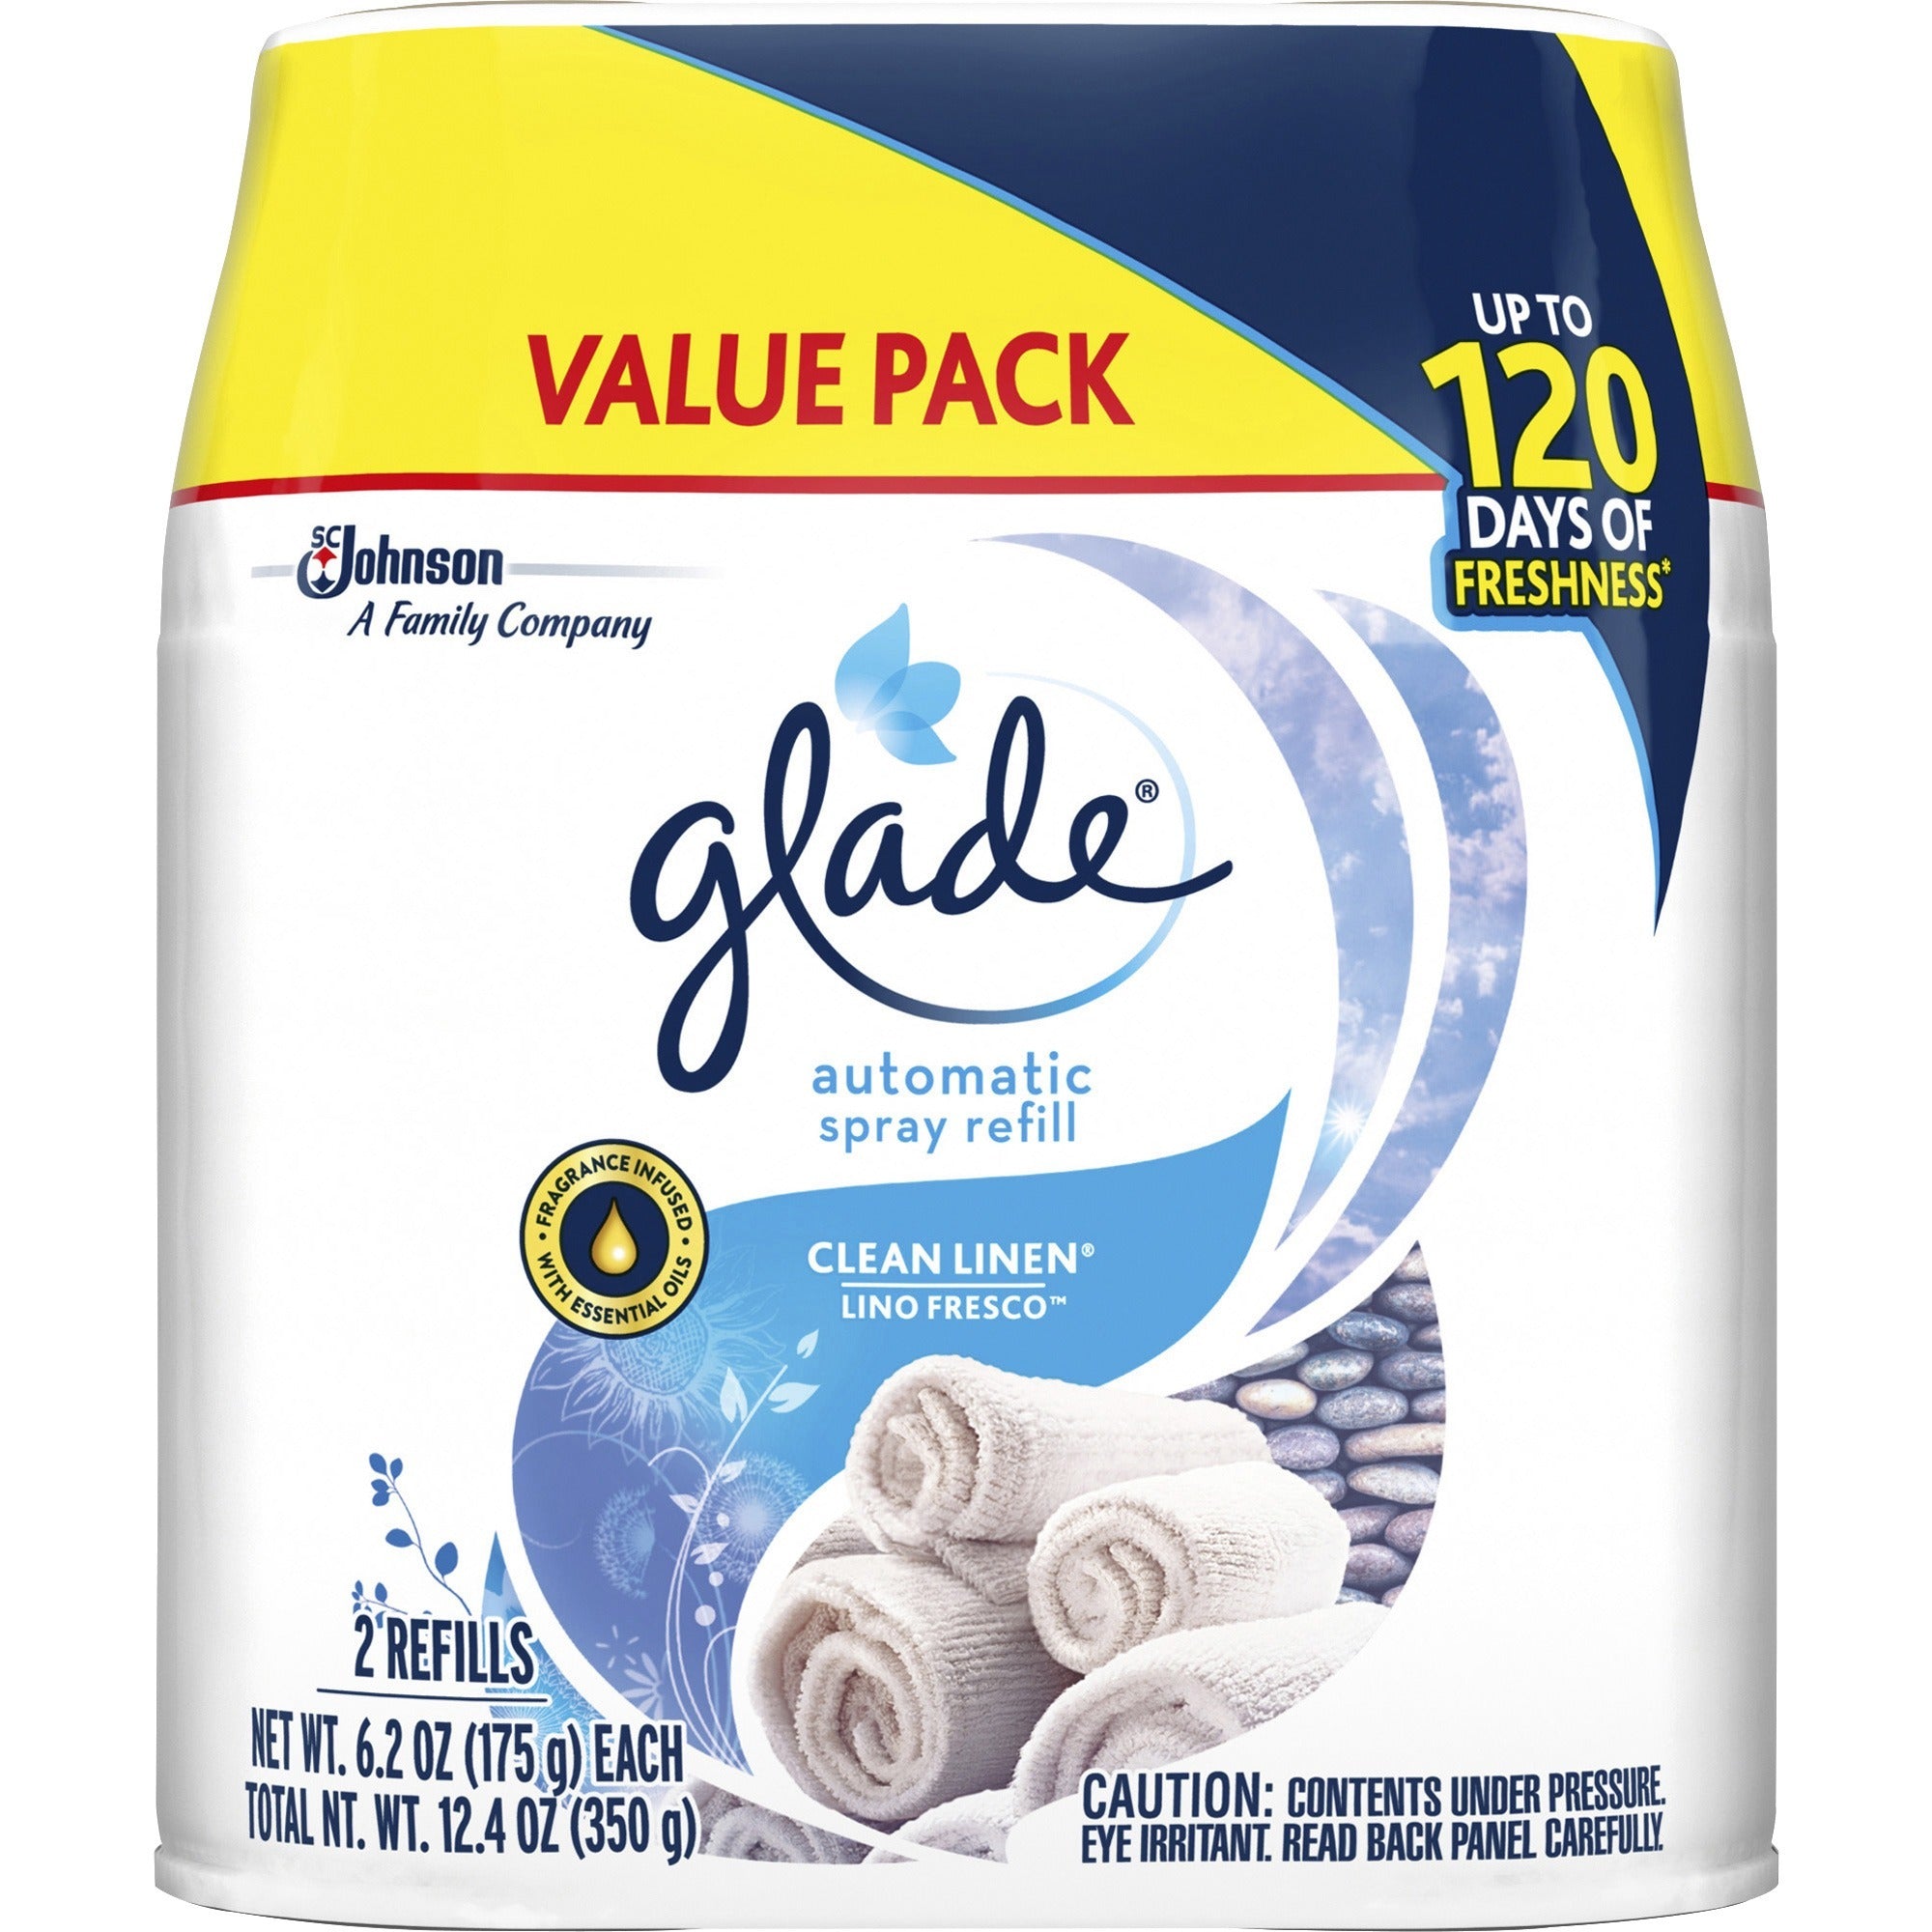 glade-automatic-spray-refill-value-pack-1240-oz-clean-linen-60-day-3-carton-long-lasting-phthalate-free-paraben-free-formaldehyde-free_sjn329388ct - 2